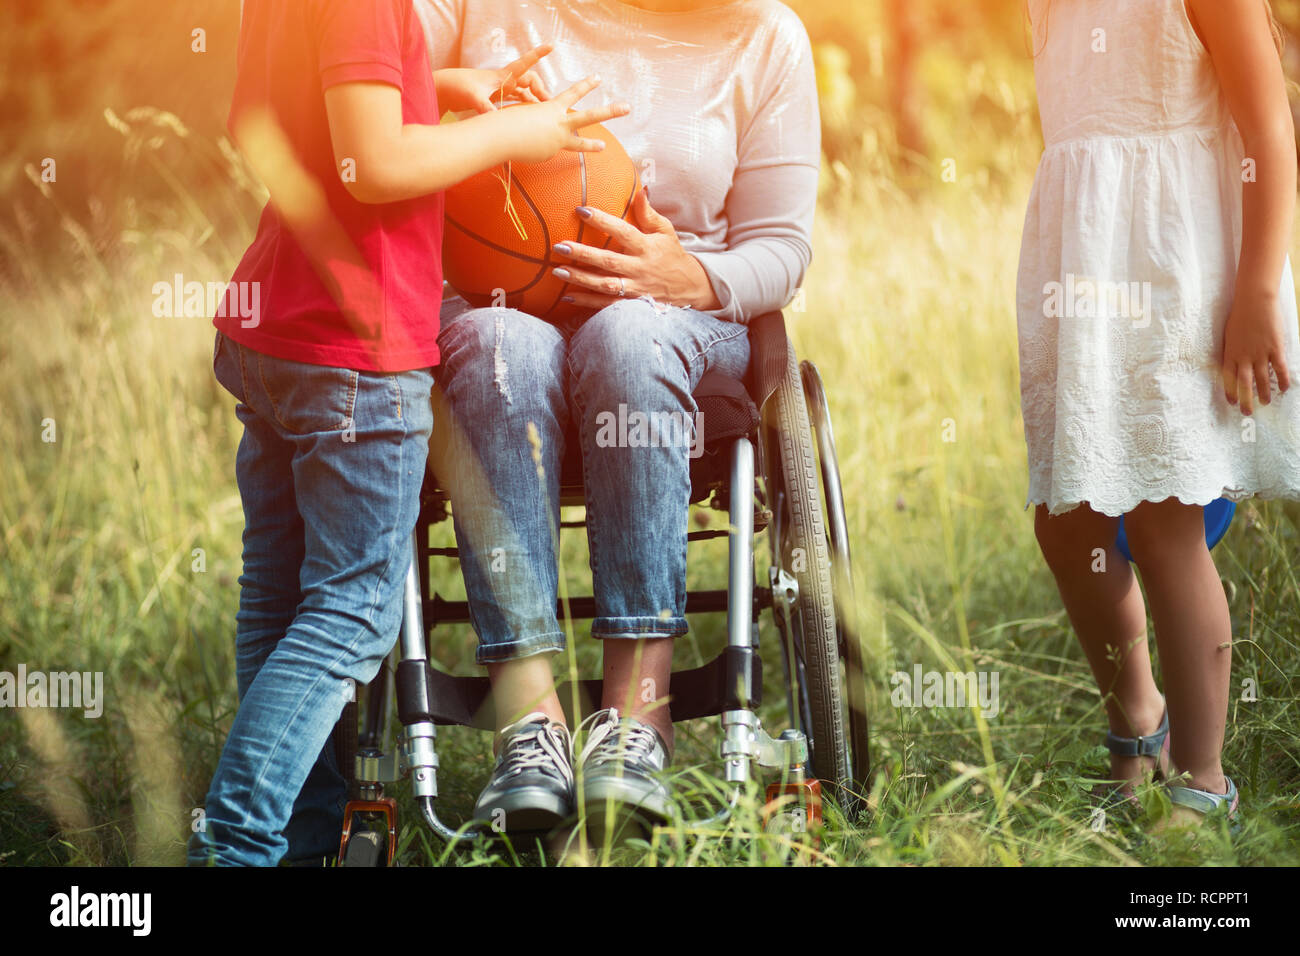 Young woman's legs in wheelchair with children aroud her Stock Photo